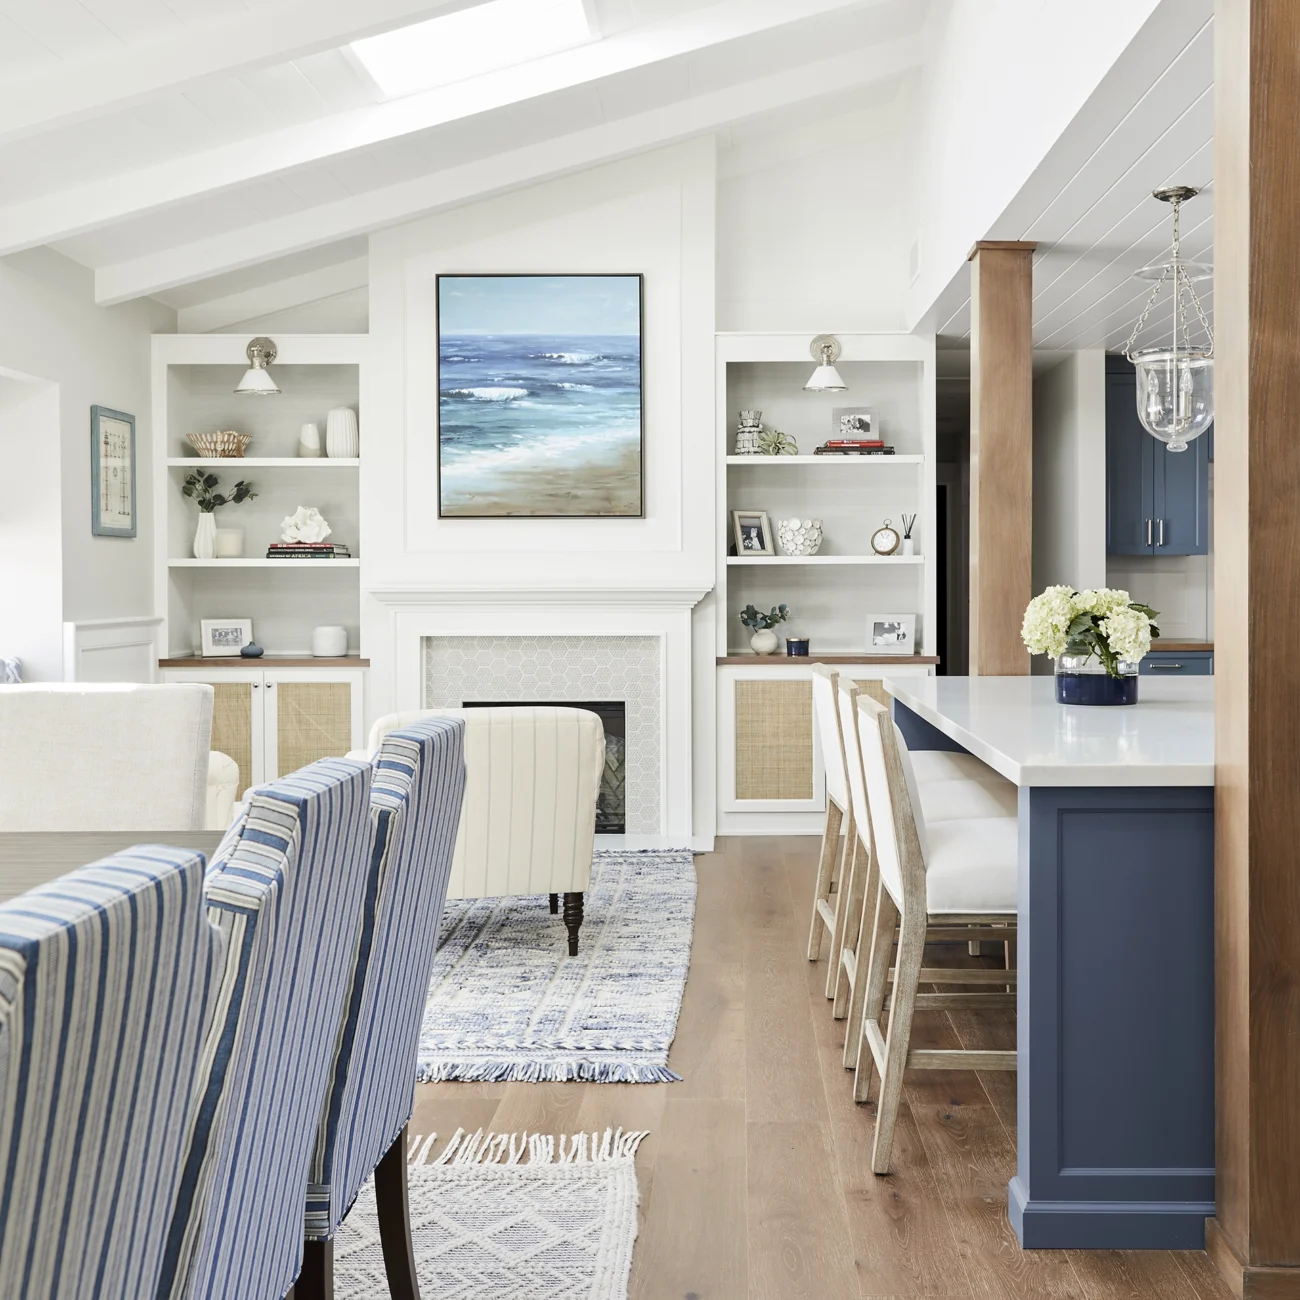 Christine Vroom Interiors | Flournoy | Costal Bright White Living Room with blue accents